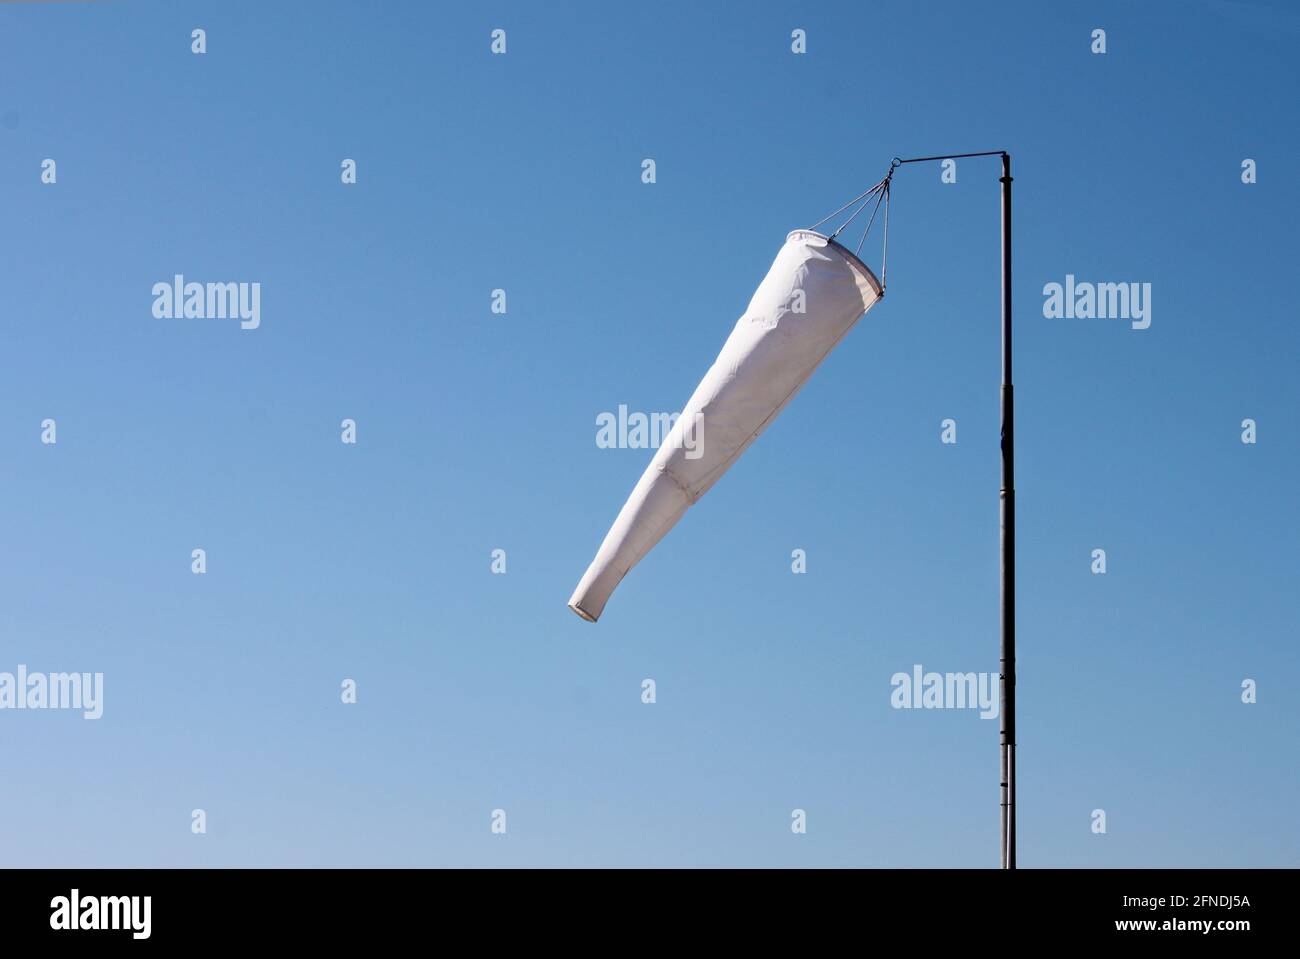 Windsock against a blue sky Stock Photo